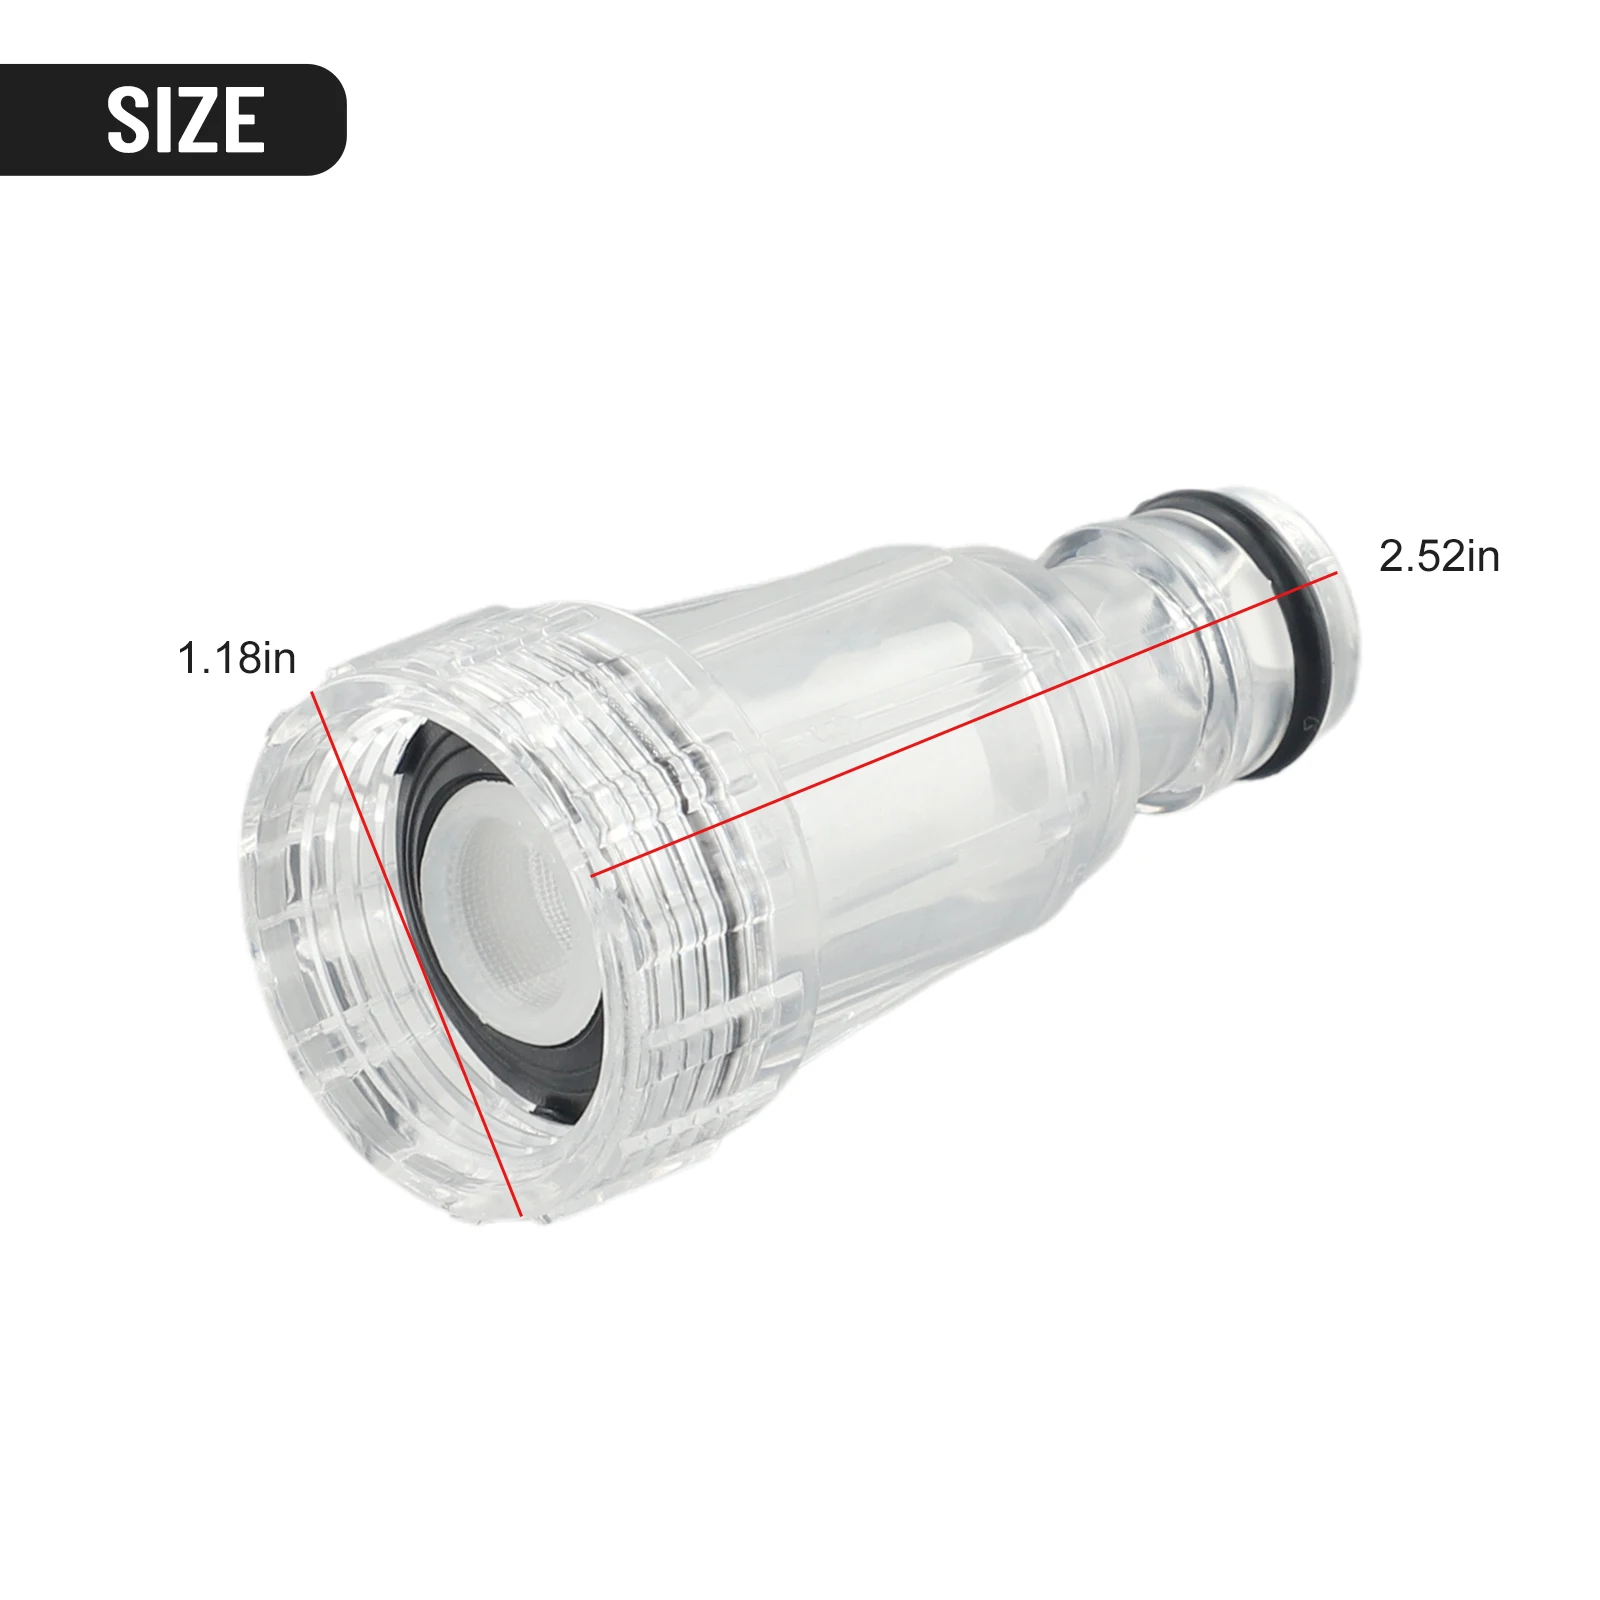 1pcs High Pressure Connection Filter+2pcs Nets For For Karcher K2-K7 Series Washer Garden Pipe Hose Adapter  Pressure Washers